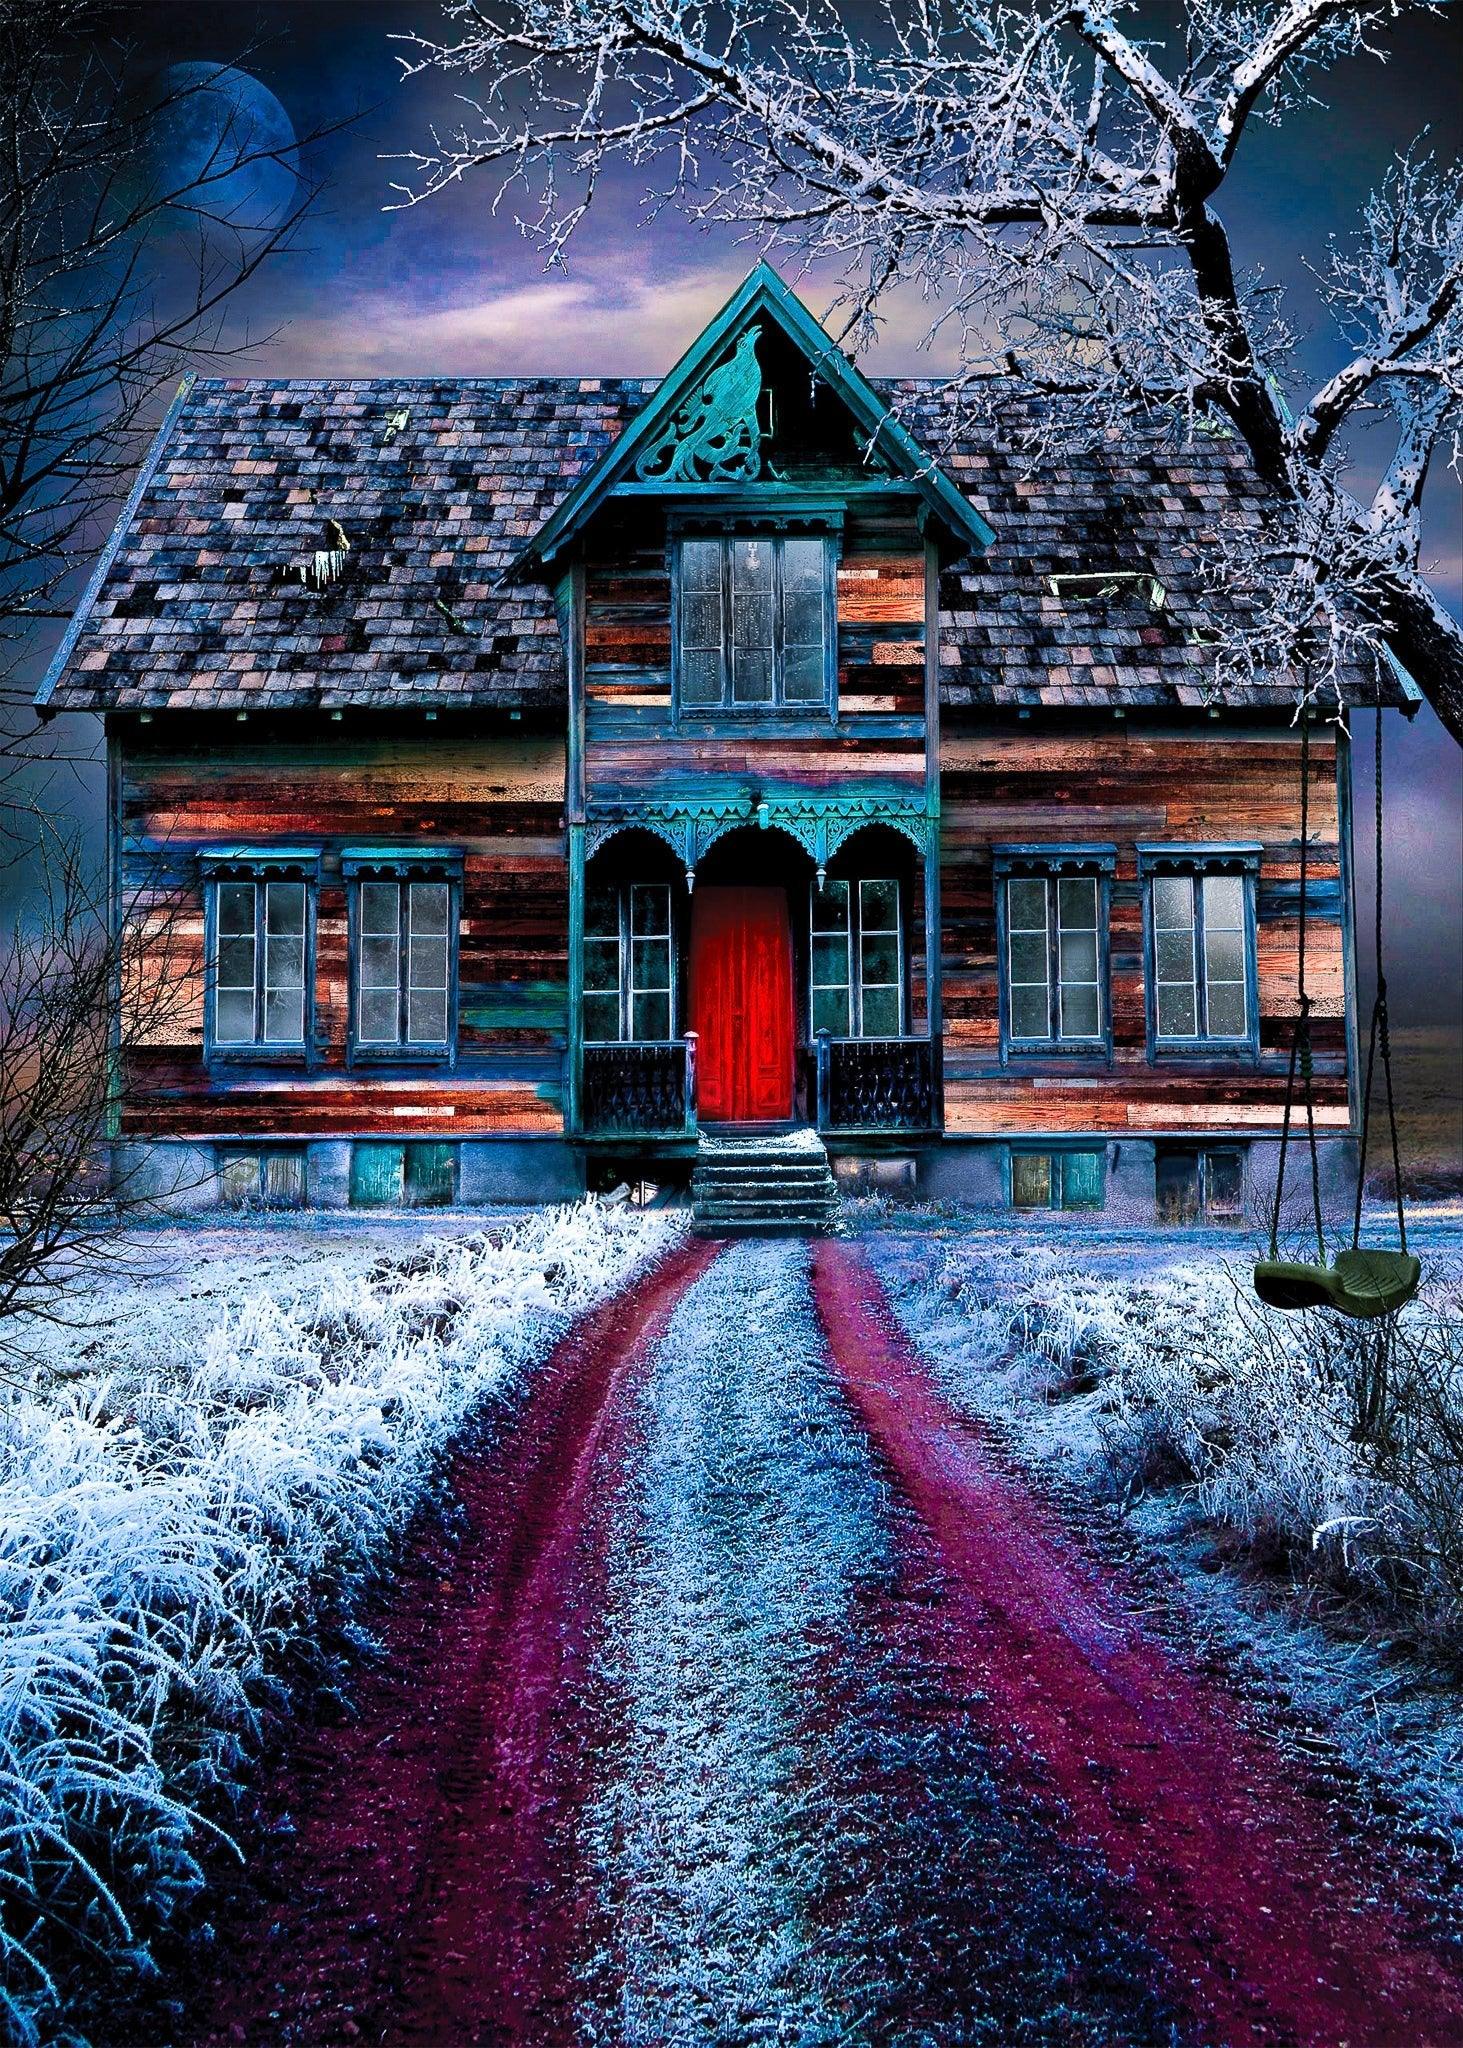 PRE-ORDER FLIPSI COMPLETE: Haunted House Puzzle | Flipsi Board Included - Flipsi Puzzles